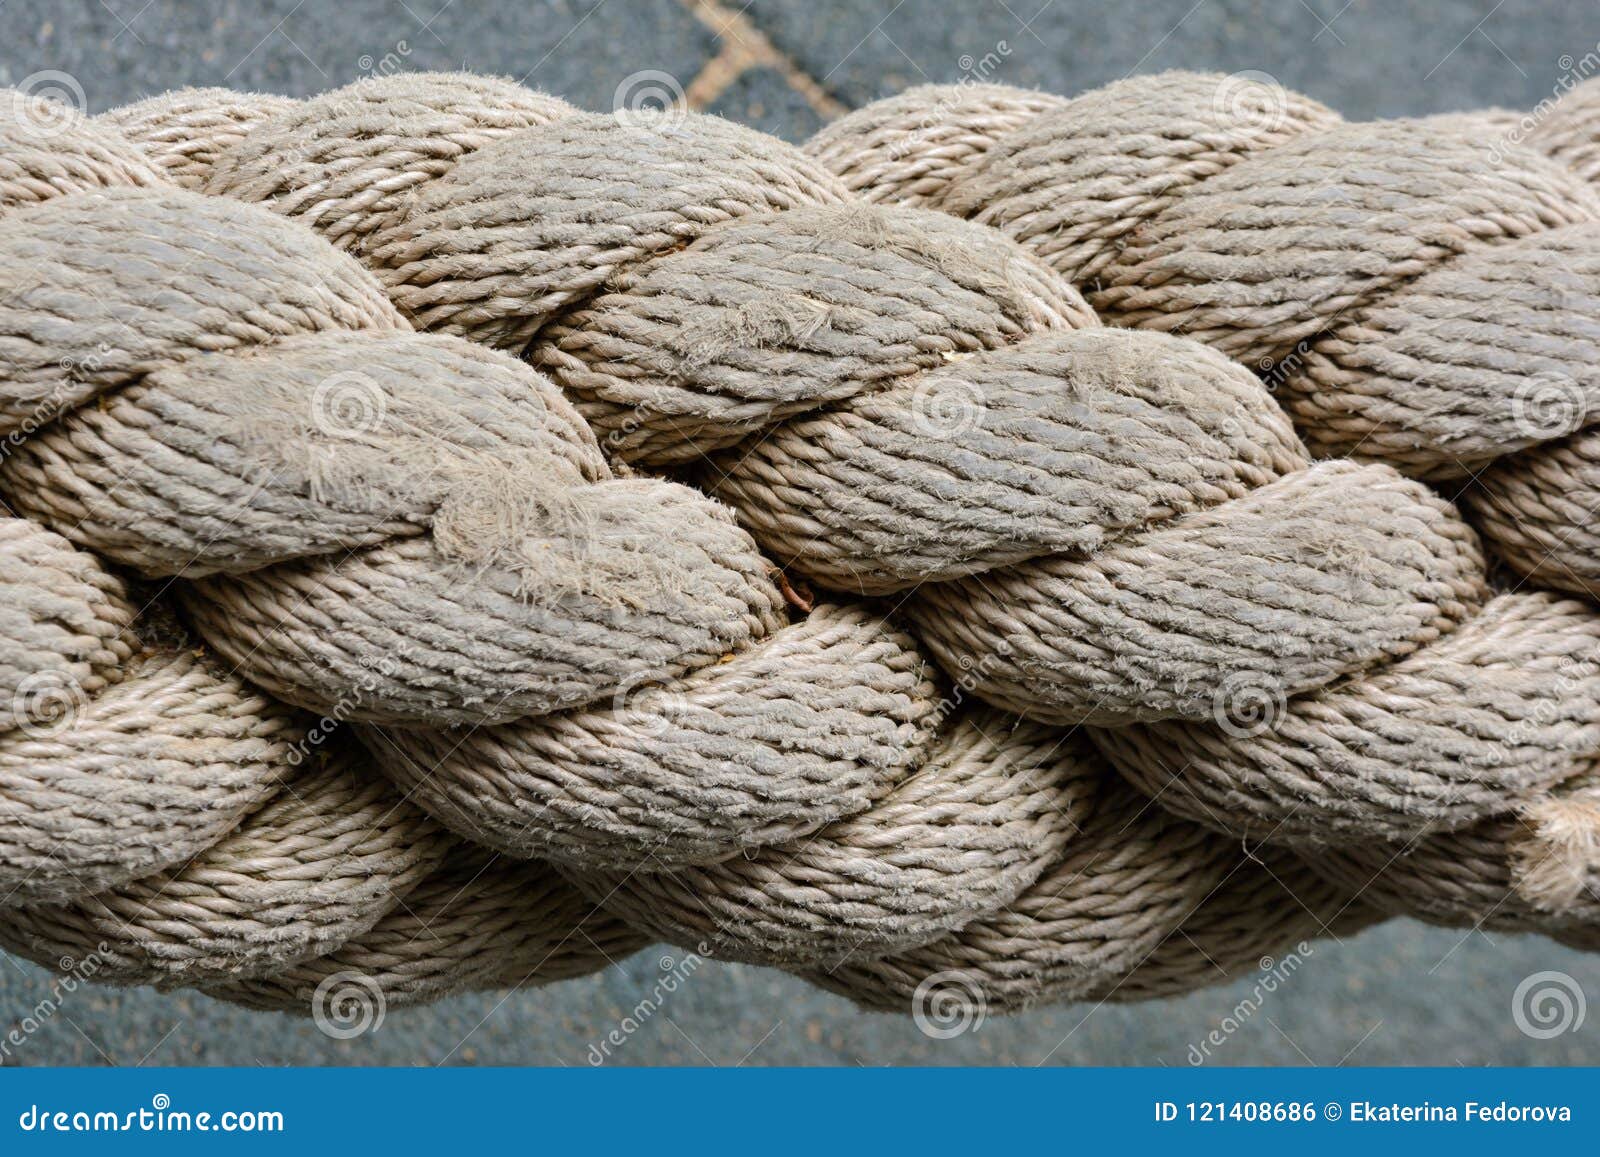 Thick Rope Close-up. Texture of Weaving. Stock Photo - Image of